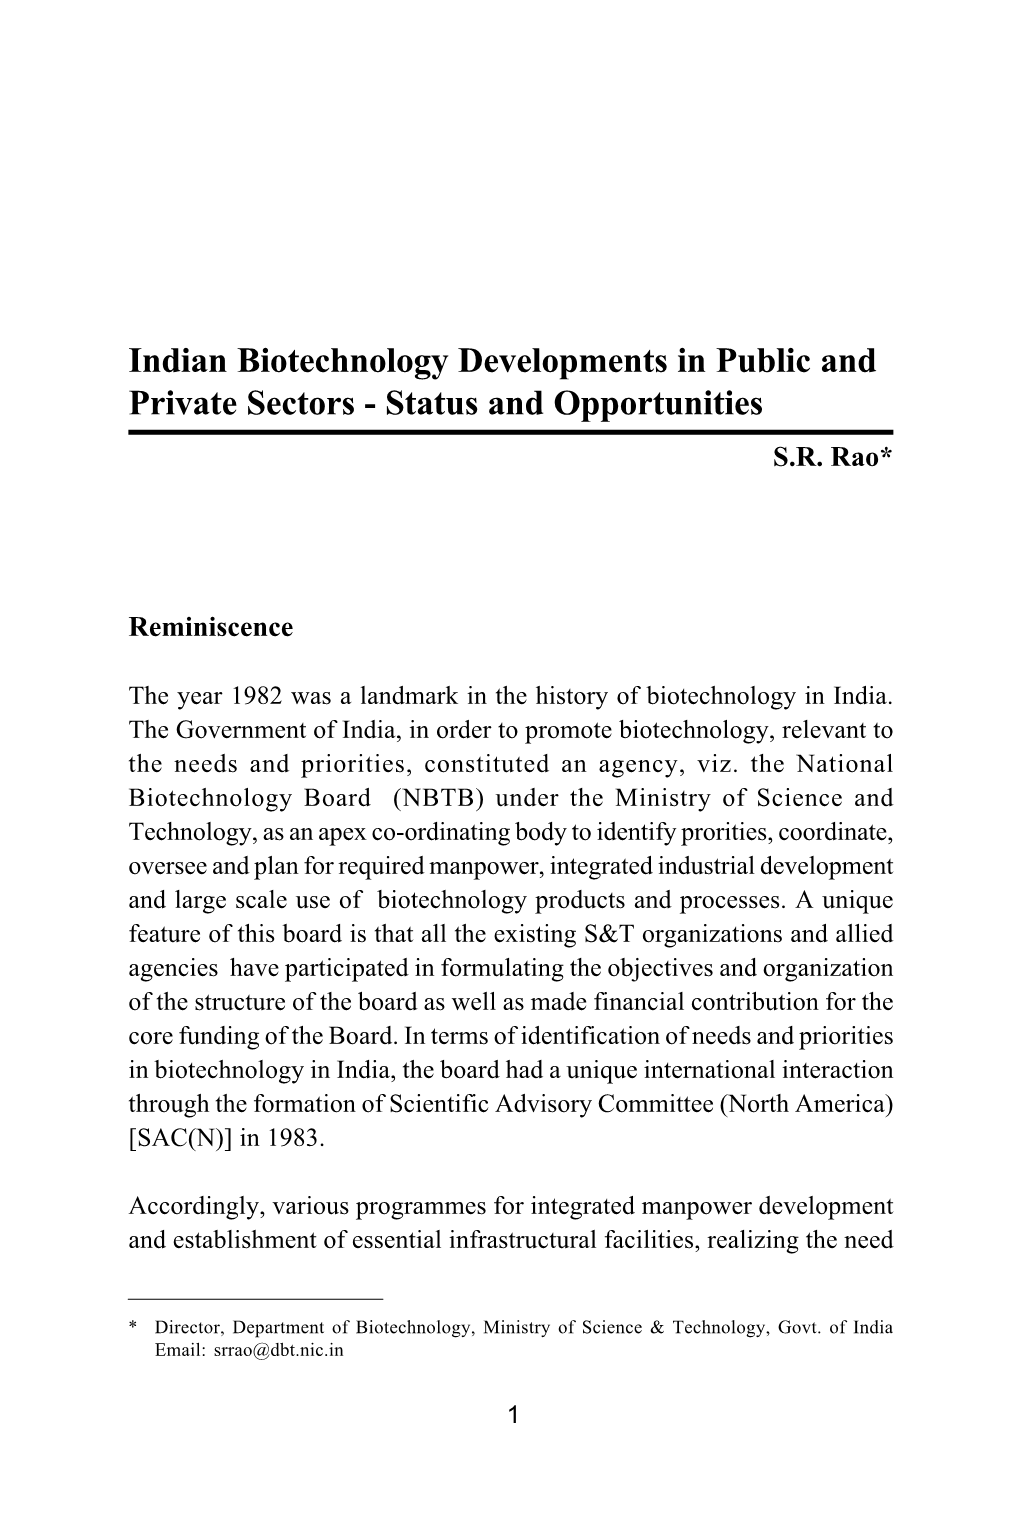 Indian Biotechnology Developments in Public and Private Sectors - Status and Opportunities S.R